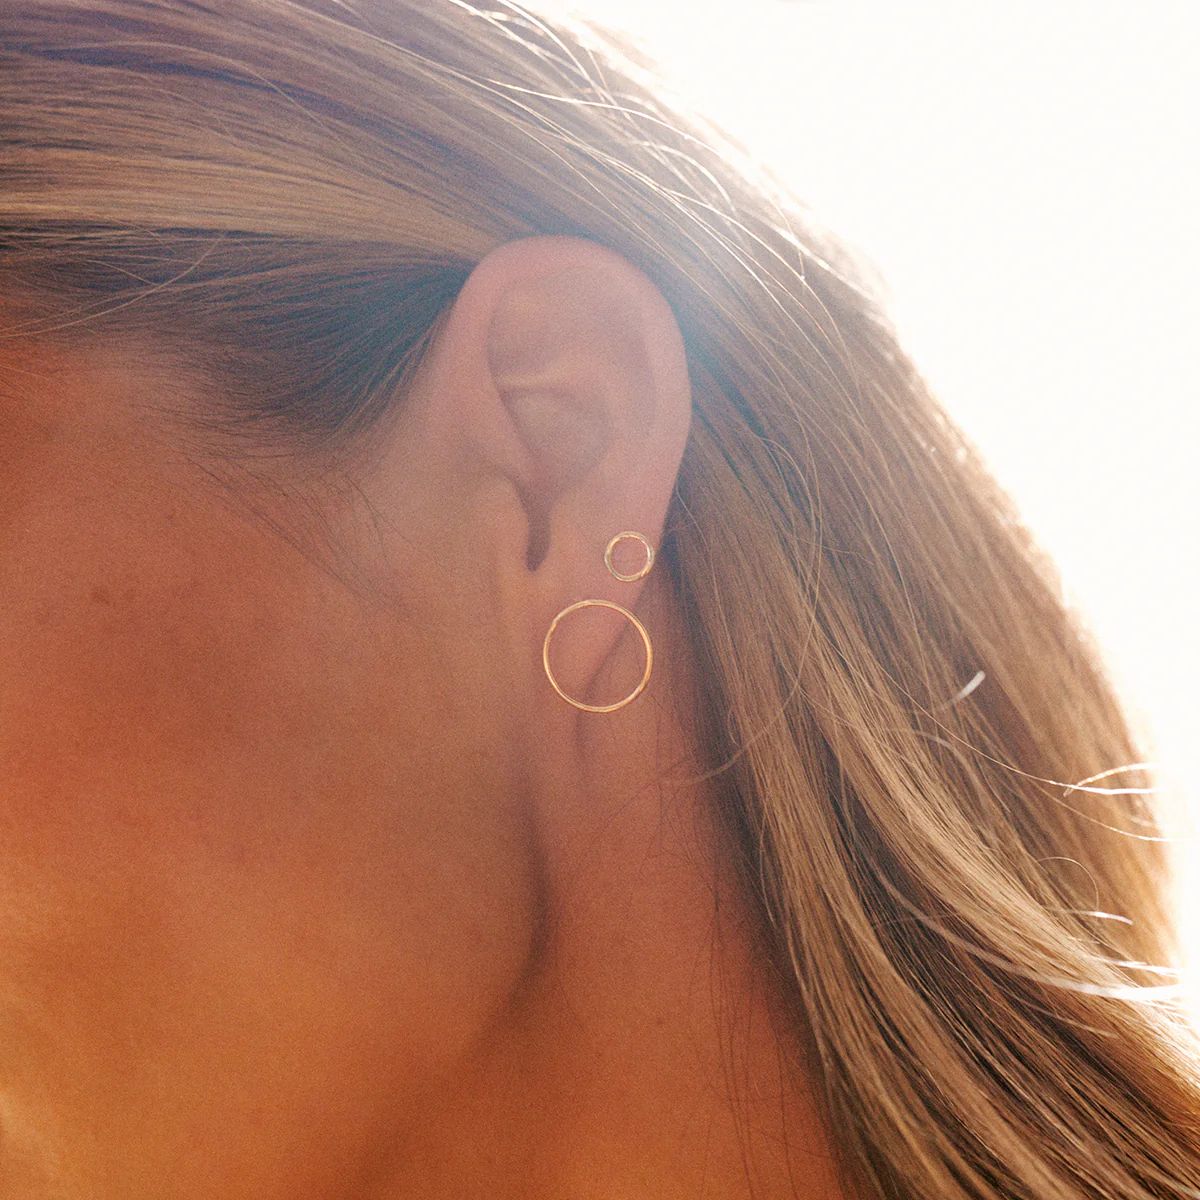 Circlet Earrings | Made by Mary (US)